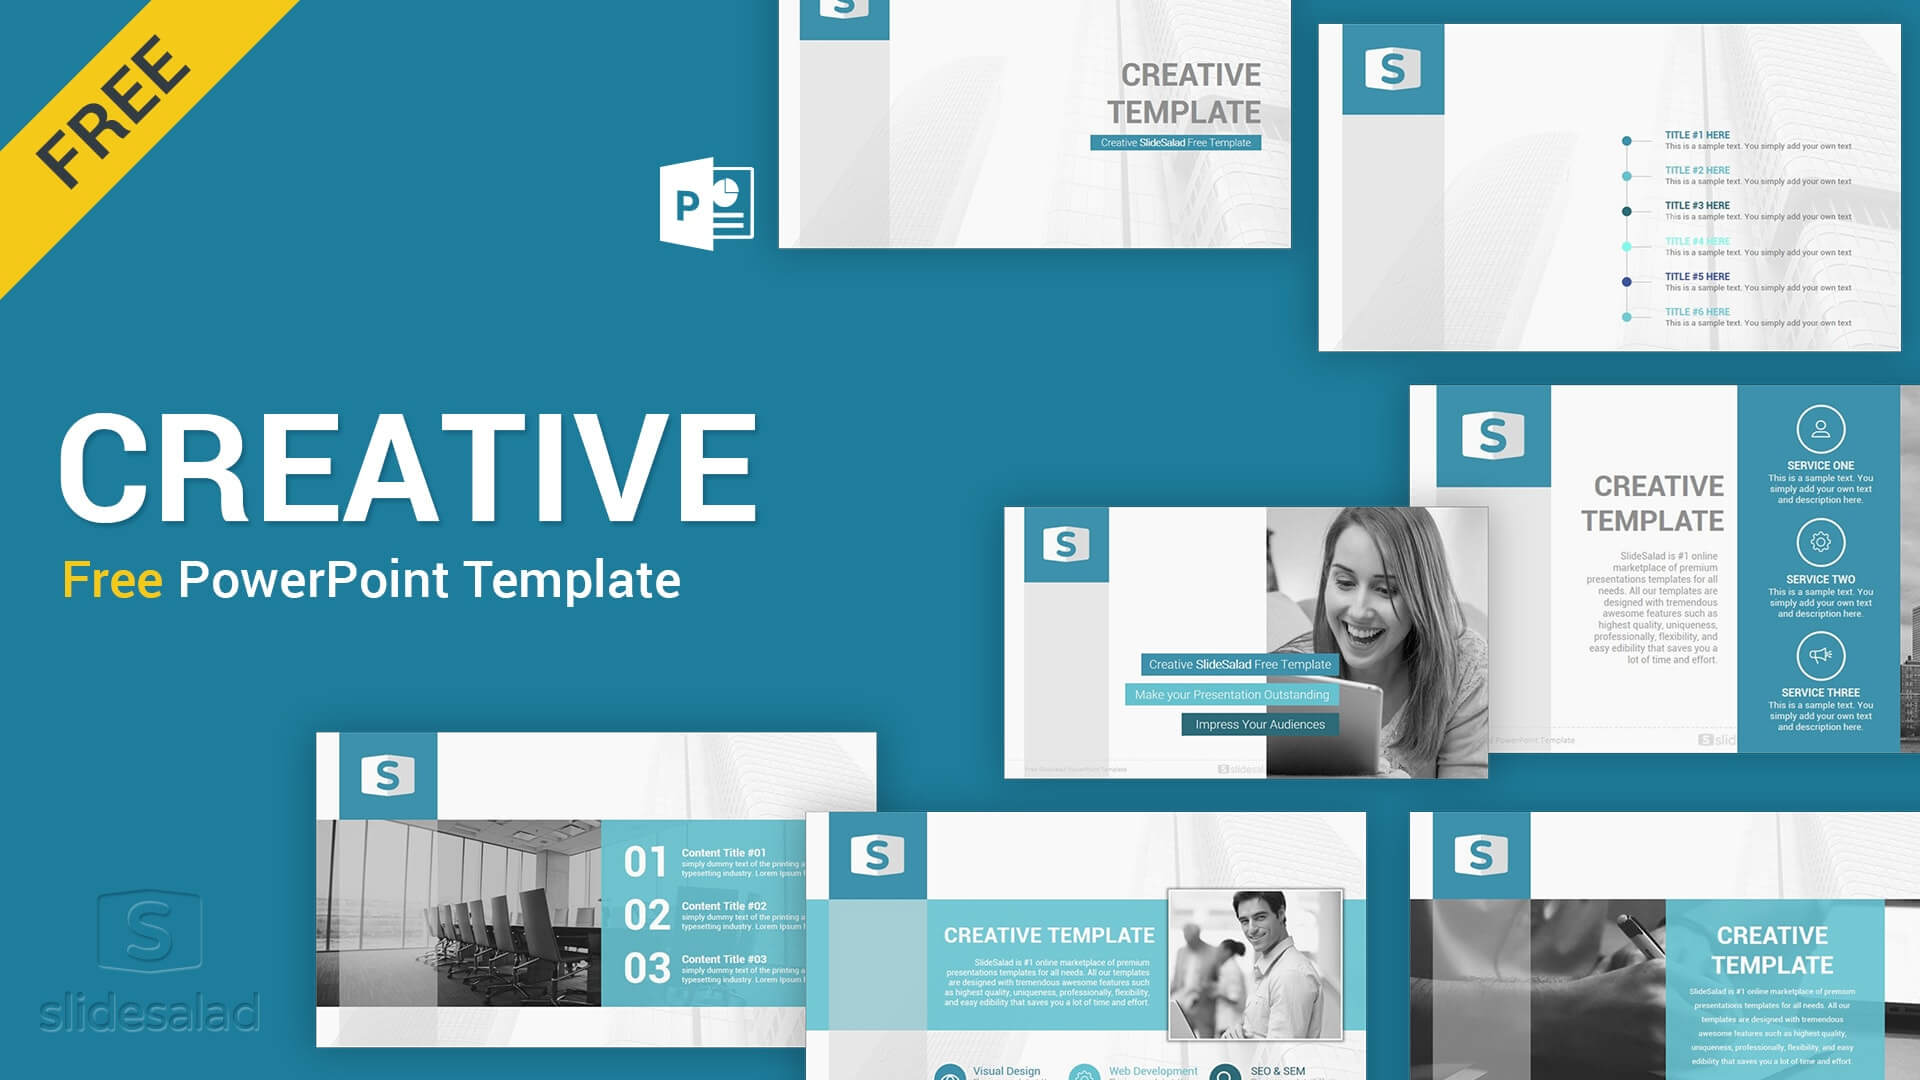 Creative Free Download Powerpoint Template – Slidesalad With Free Powerpoint Presentation Templates Downloads